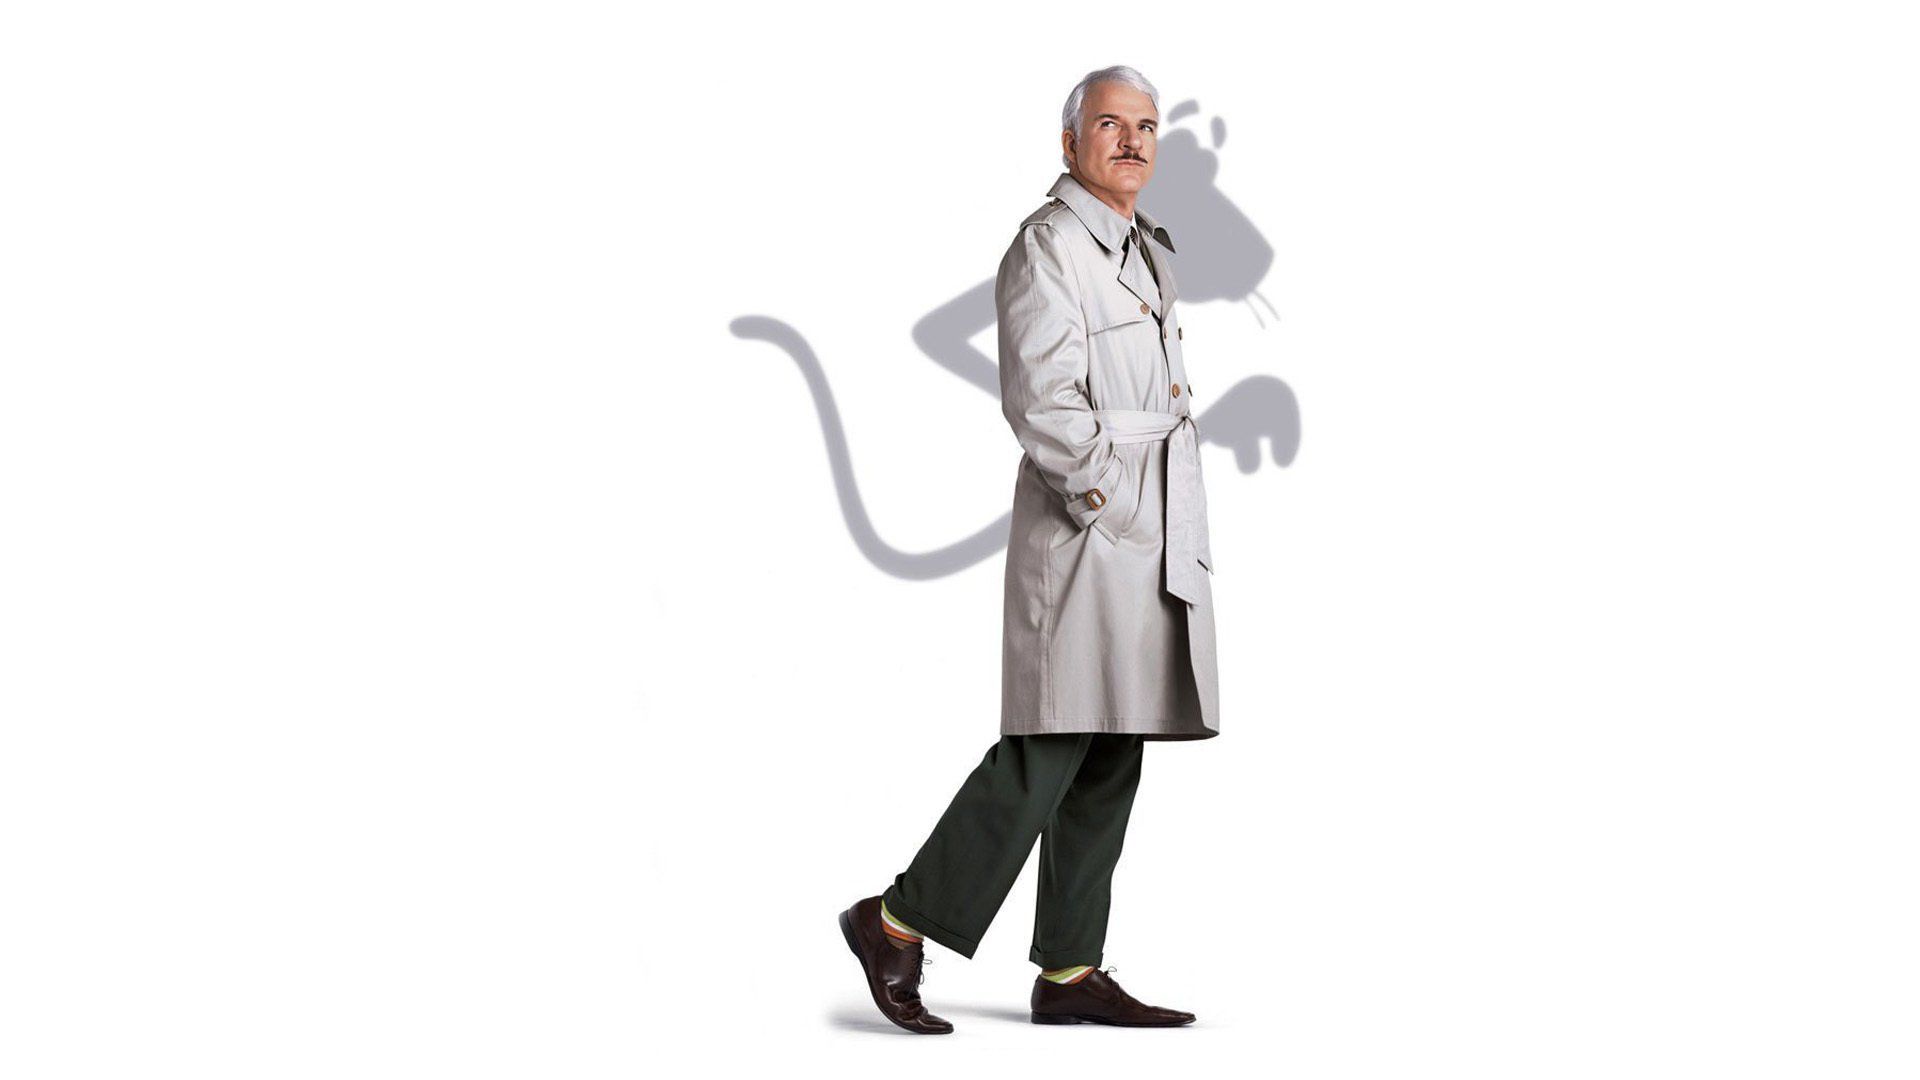 The Pink Panther (Steve Martin) background